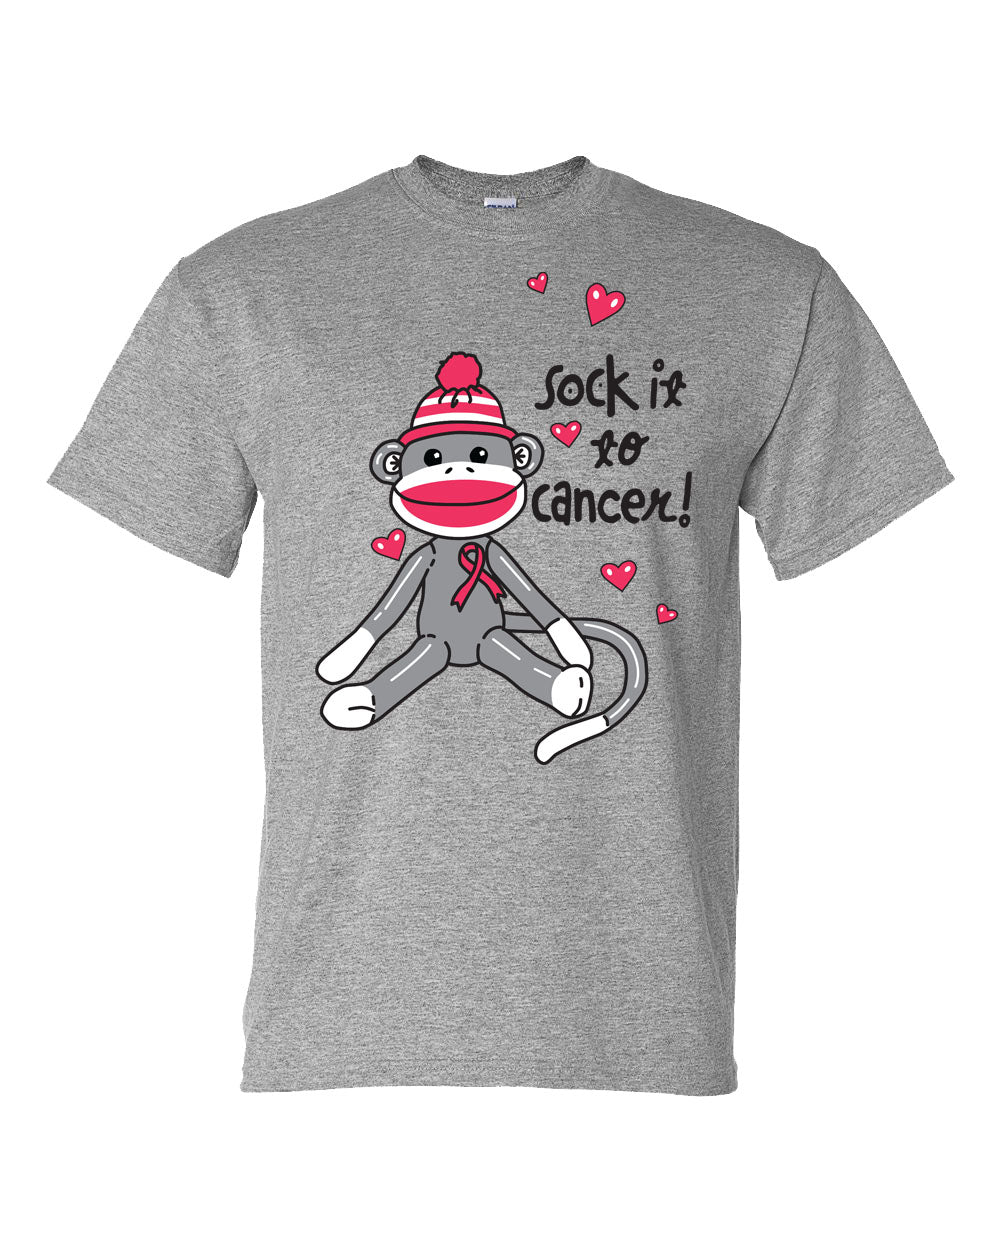 Sock It To Cancer - DryBlend T-shirt - Clearance